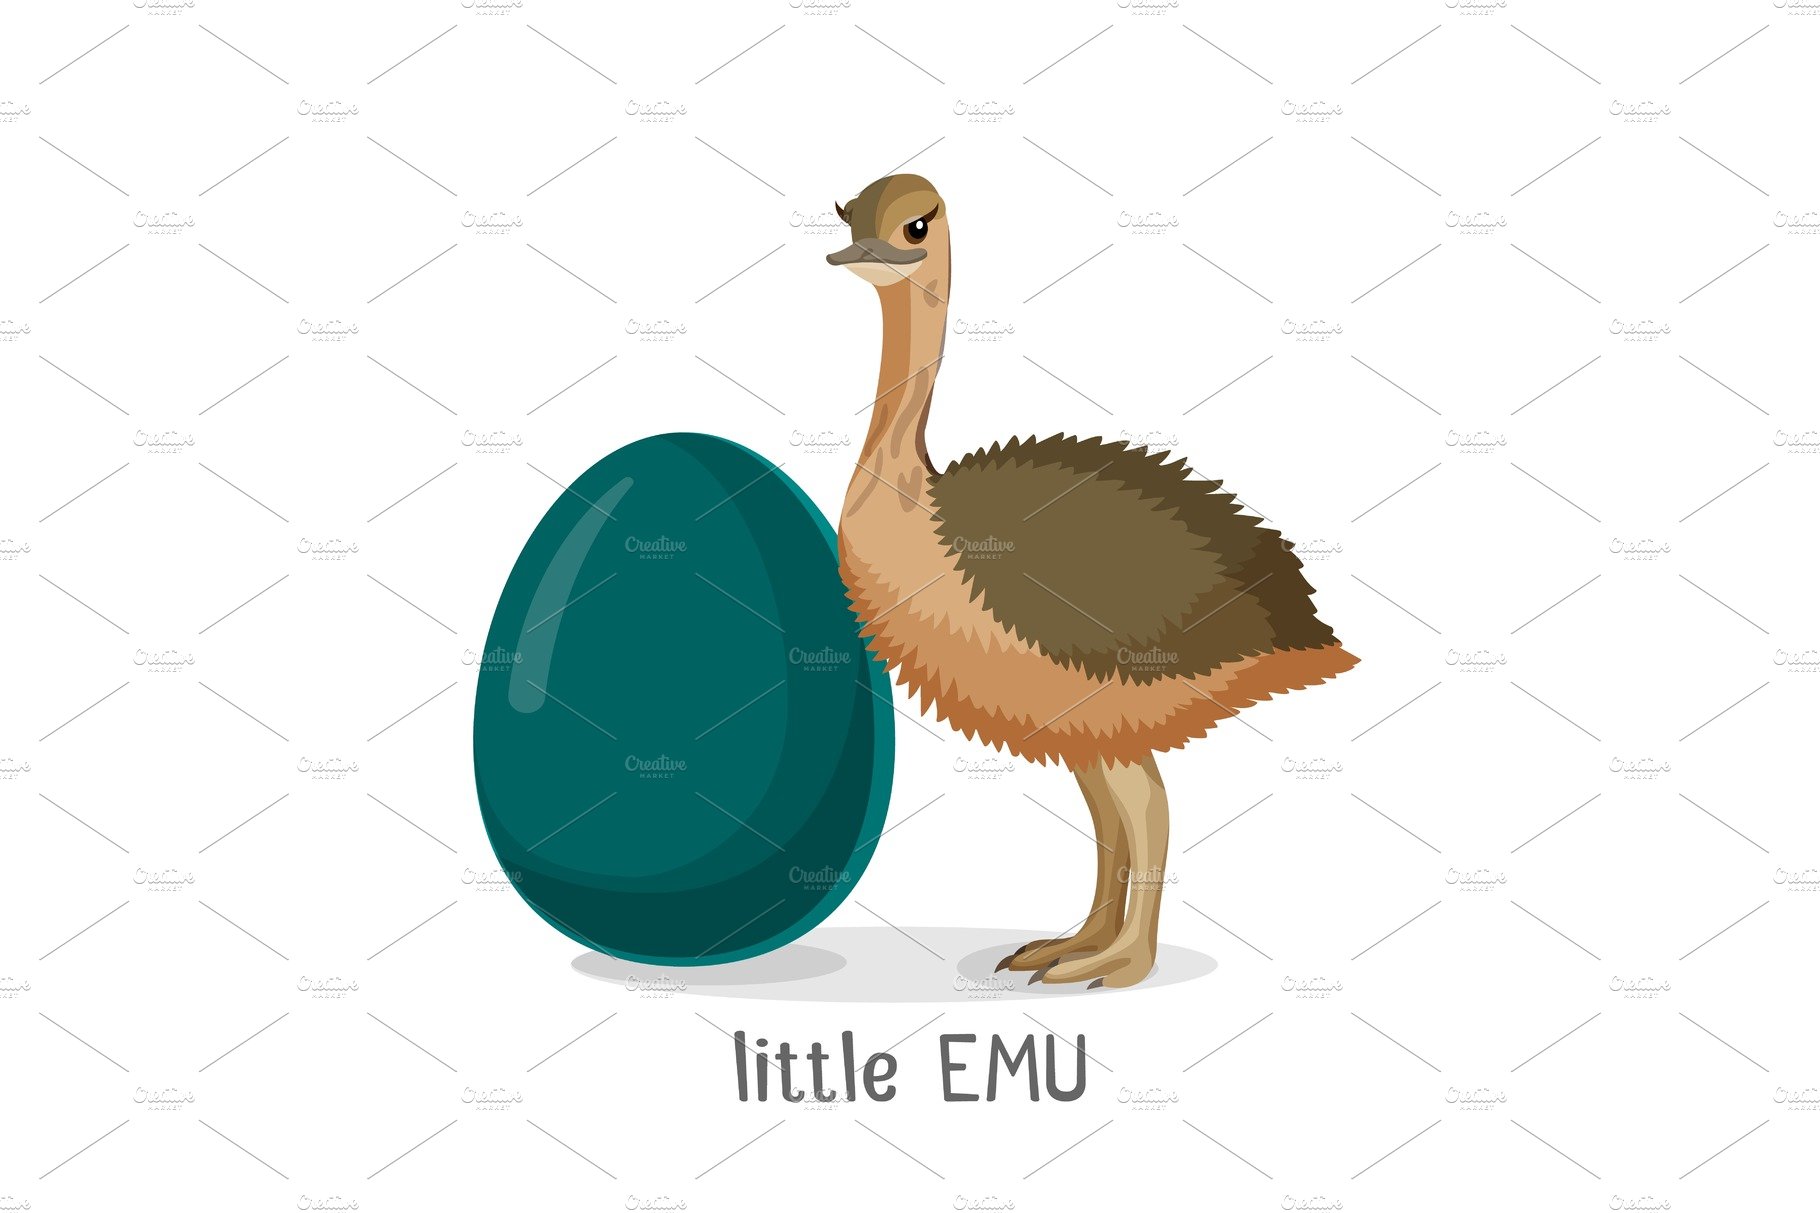 Little Emu bird isolated on white background, small chick cover image.